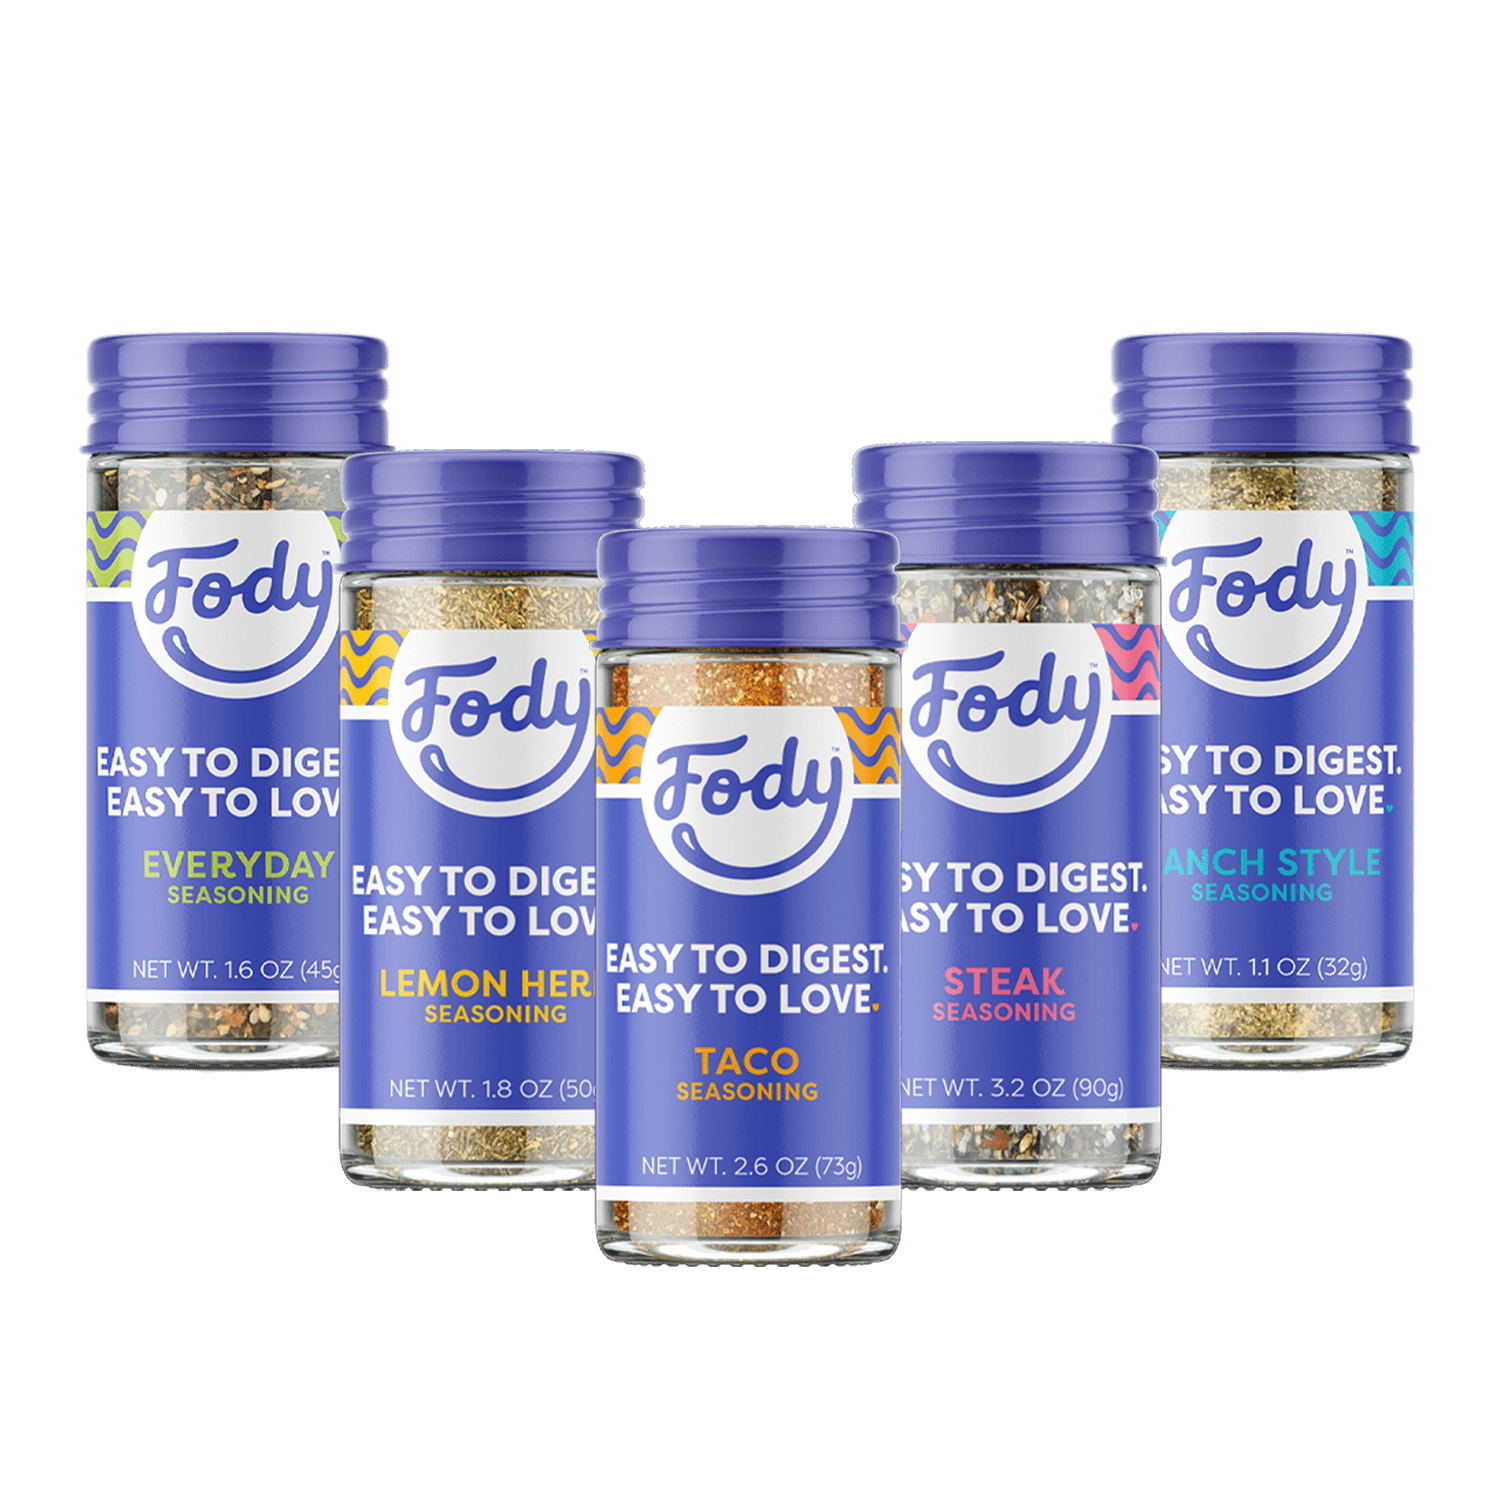 Which Spices are Okay to Use on the Low FODMAP Diet? – FODY Food Co. - USA